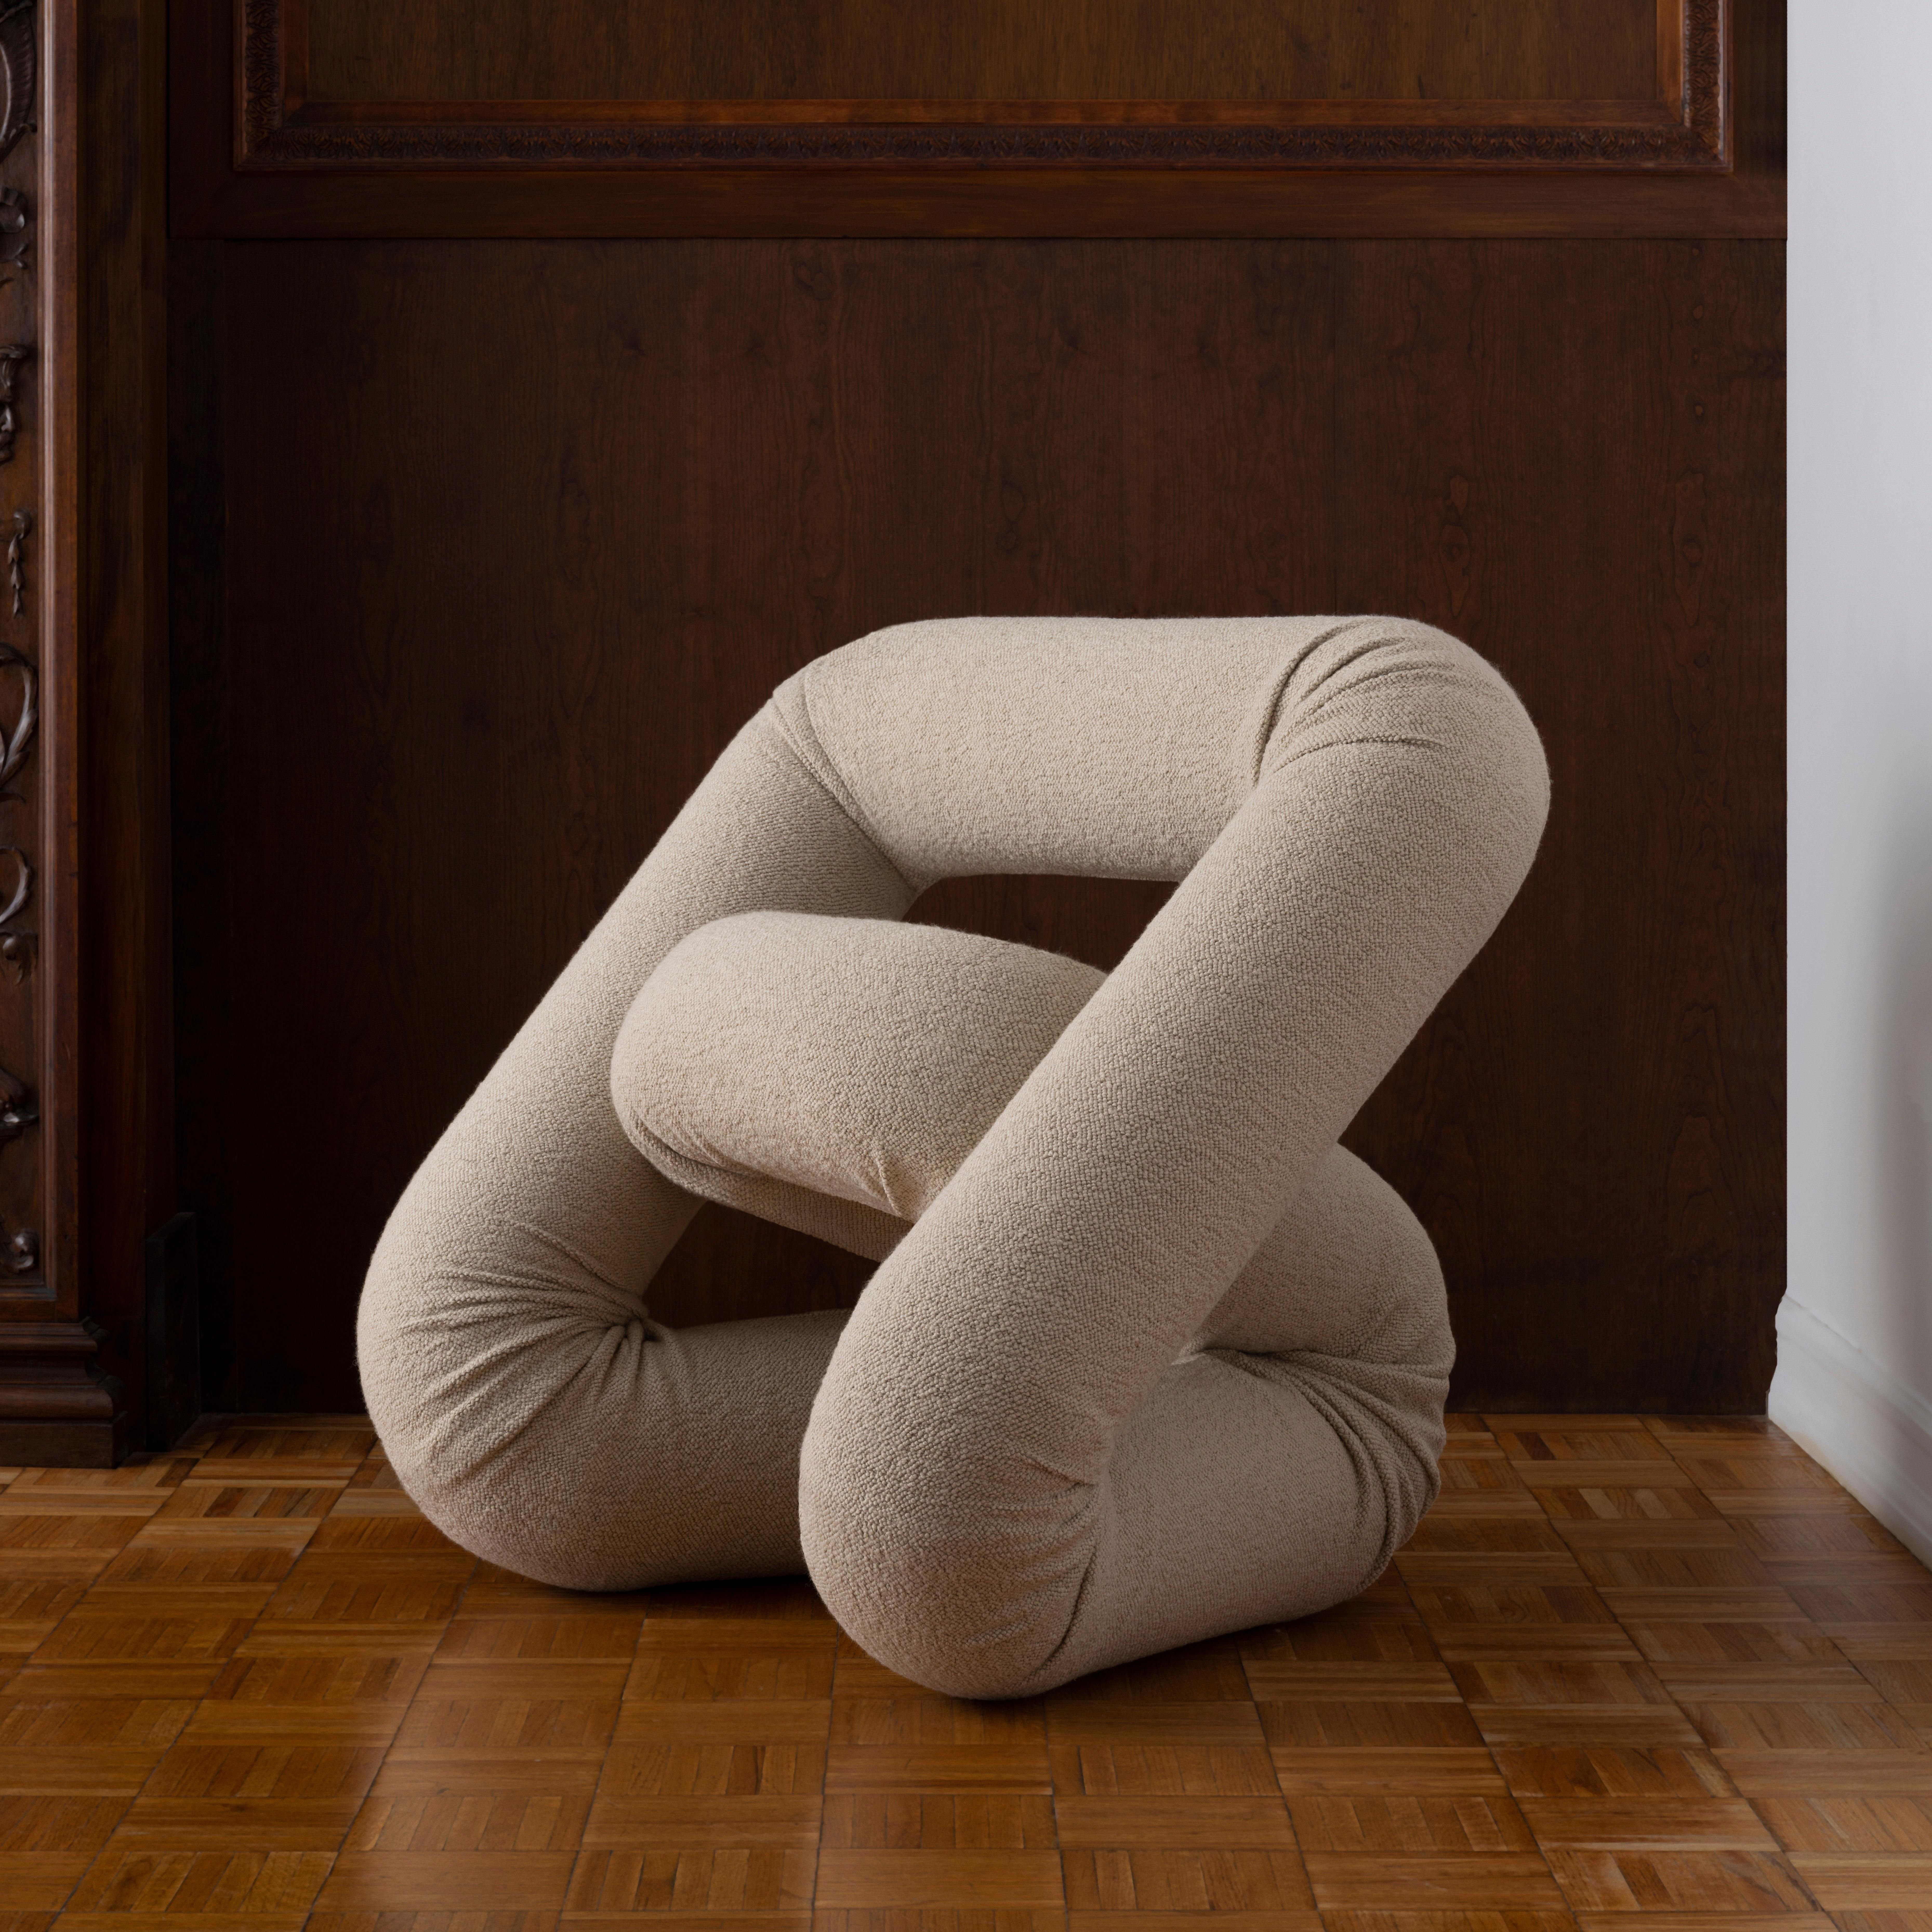 Plush and comfortable, this chair is incredibly unique in its shape and feeling. It feels supportive and sturdy, and brings a subtle artistic flair to the living room.

Additional information:
Bradley Bowers’ 'Frank' hardly resembles a chair at